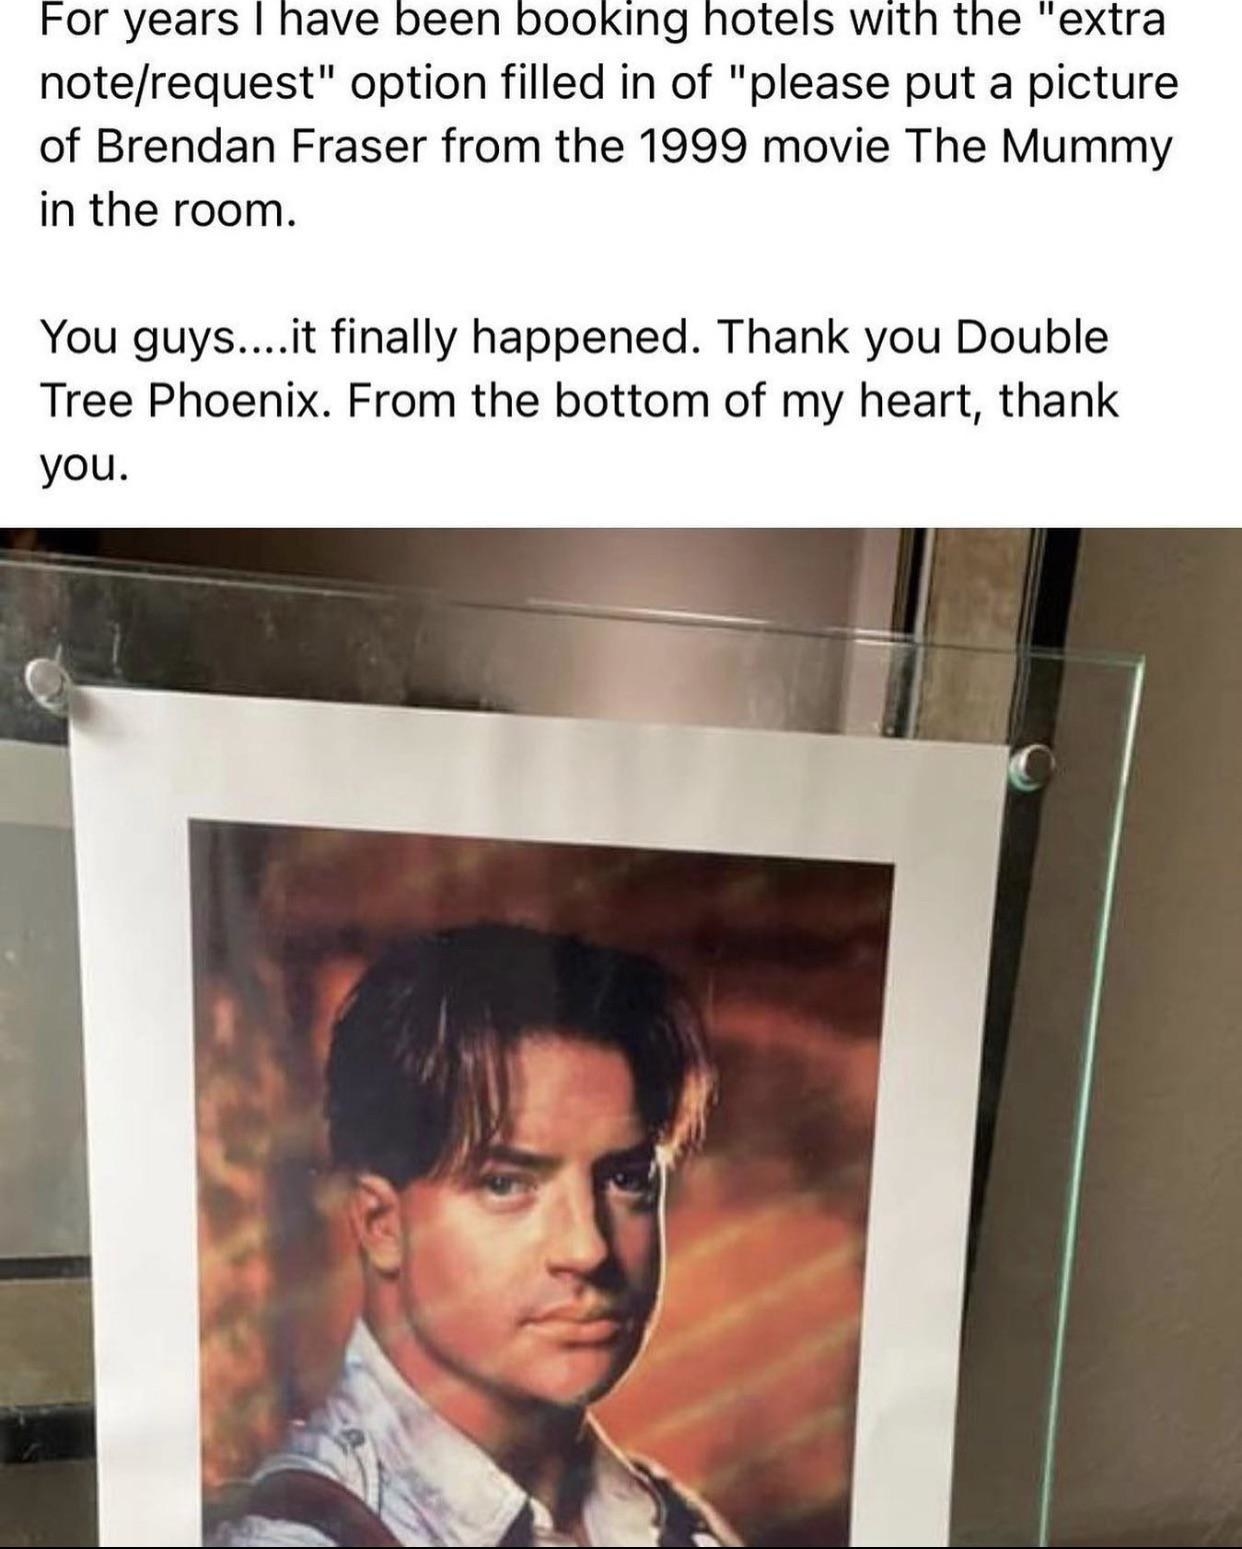 Hotel guest always requests a picture of &quot;Brendan Fraser from the 1999 movie The Dummy&quot; in their room, and they finally get their wish